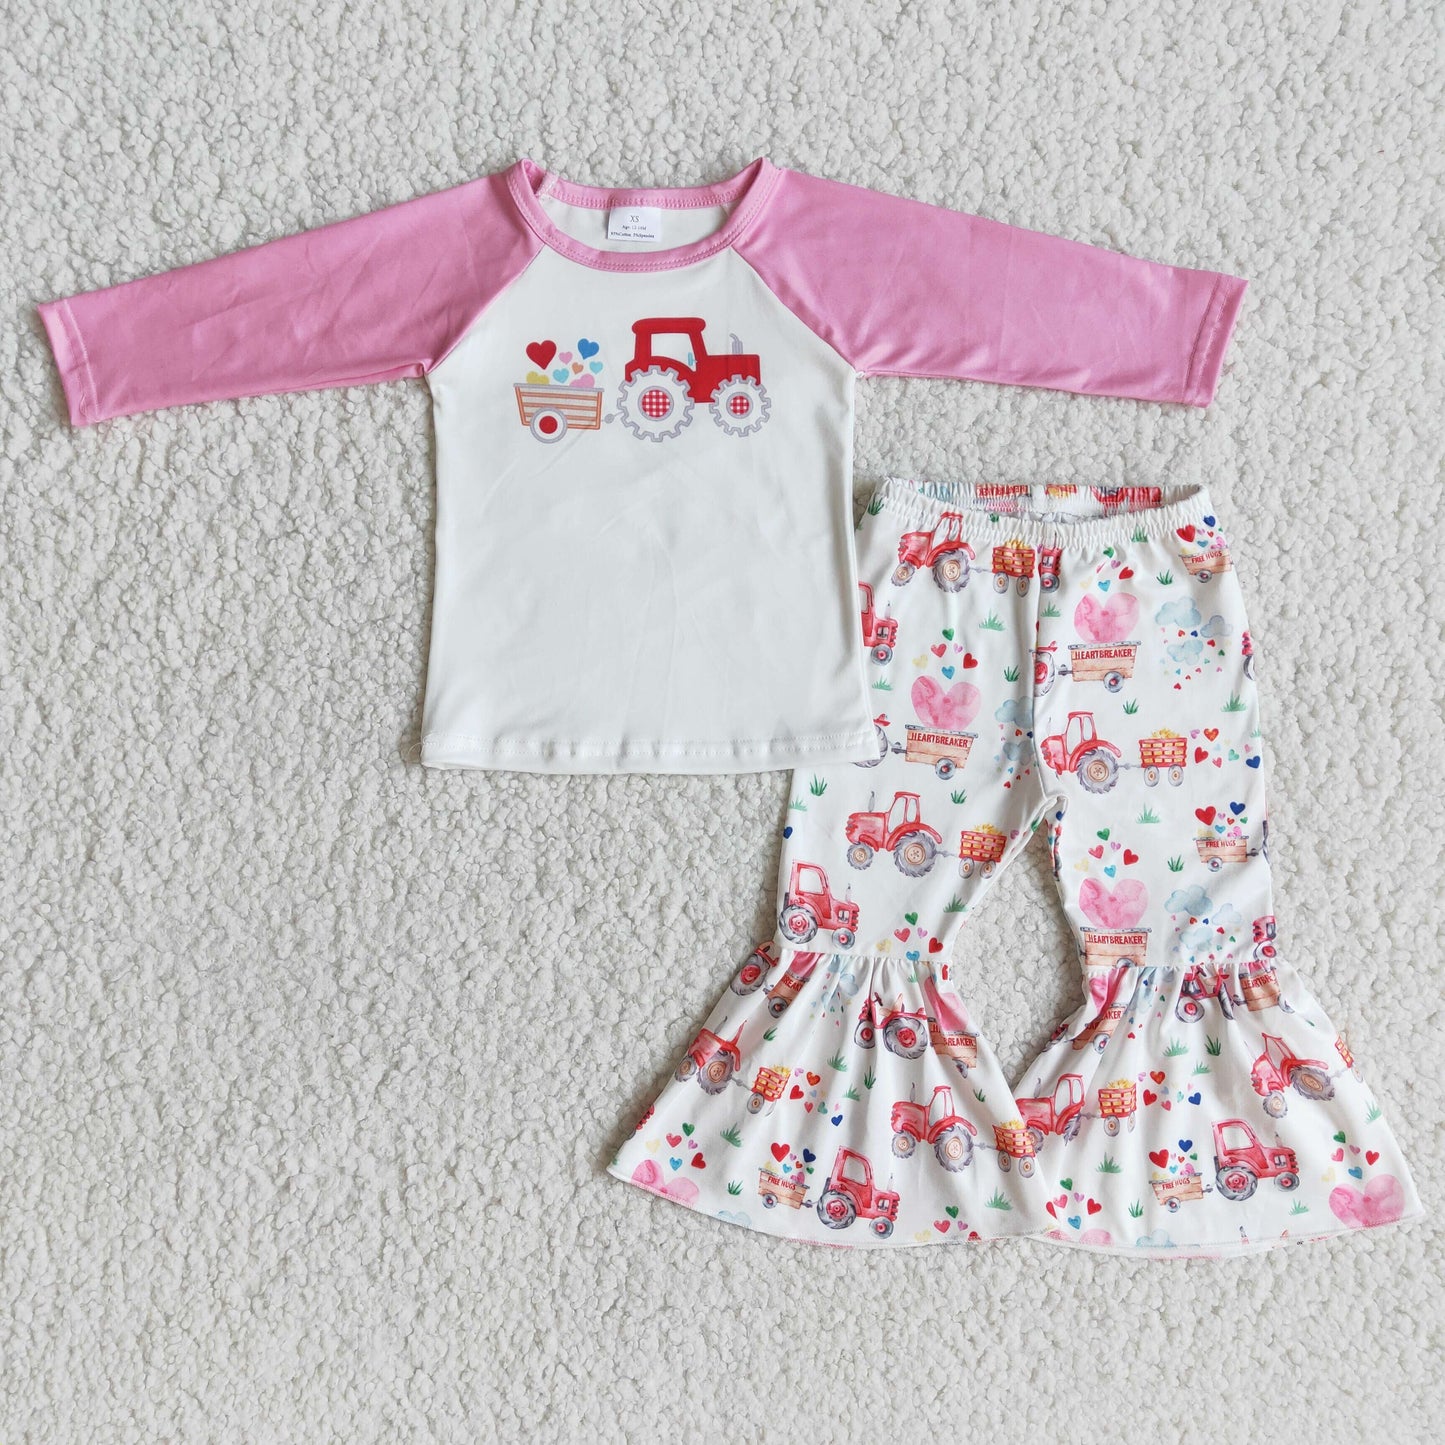 pink long sleeve truck of heart print bells outfit